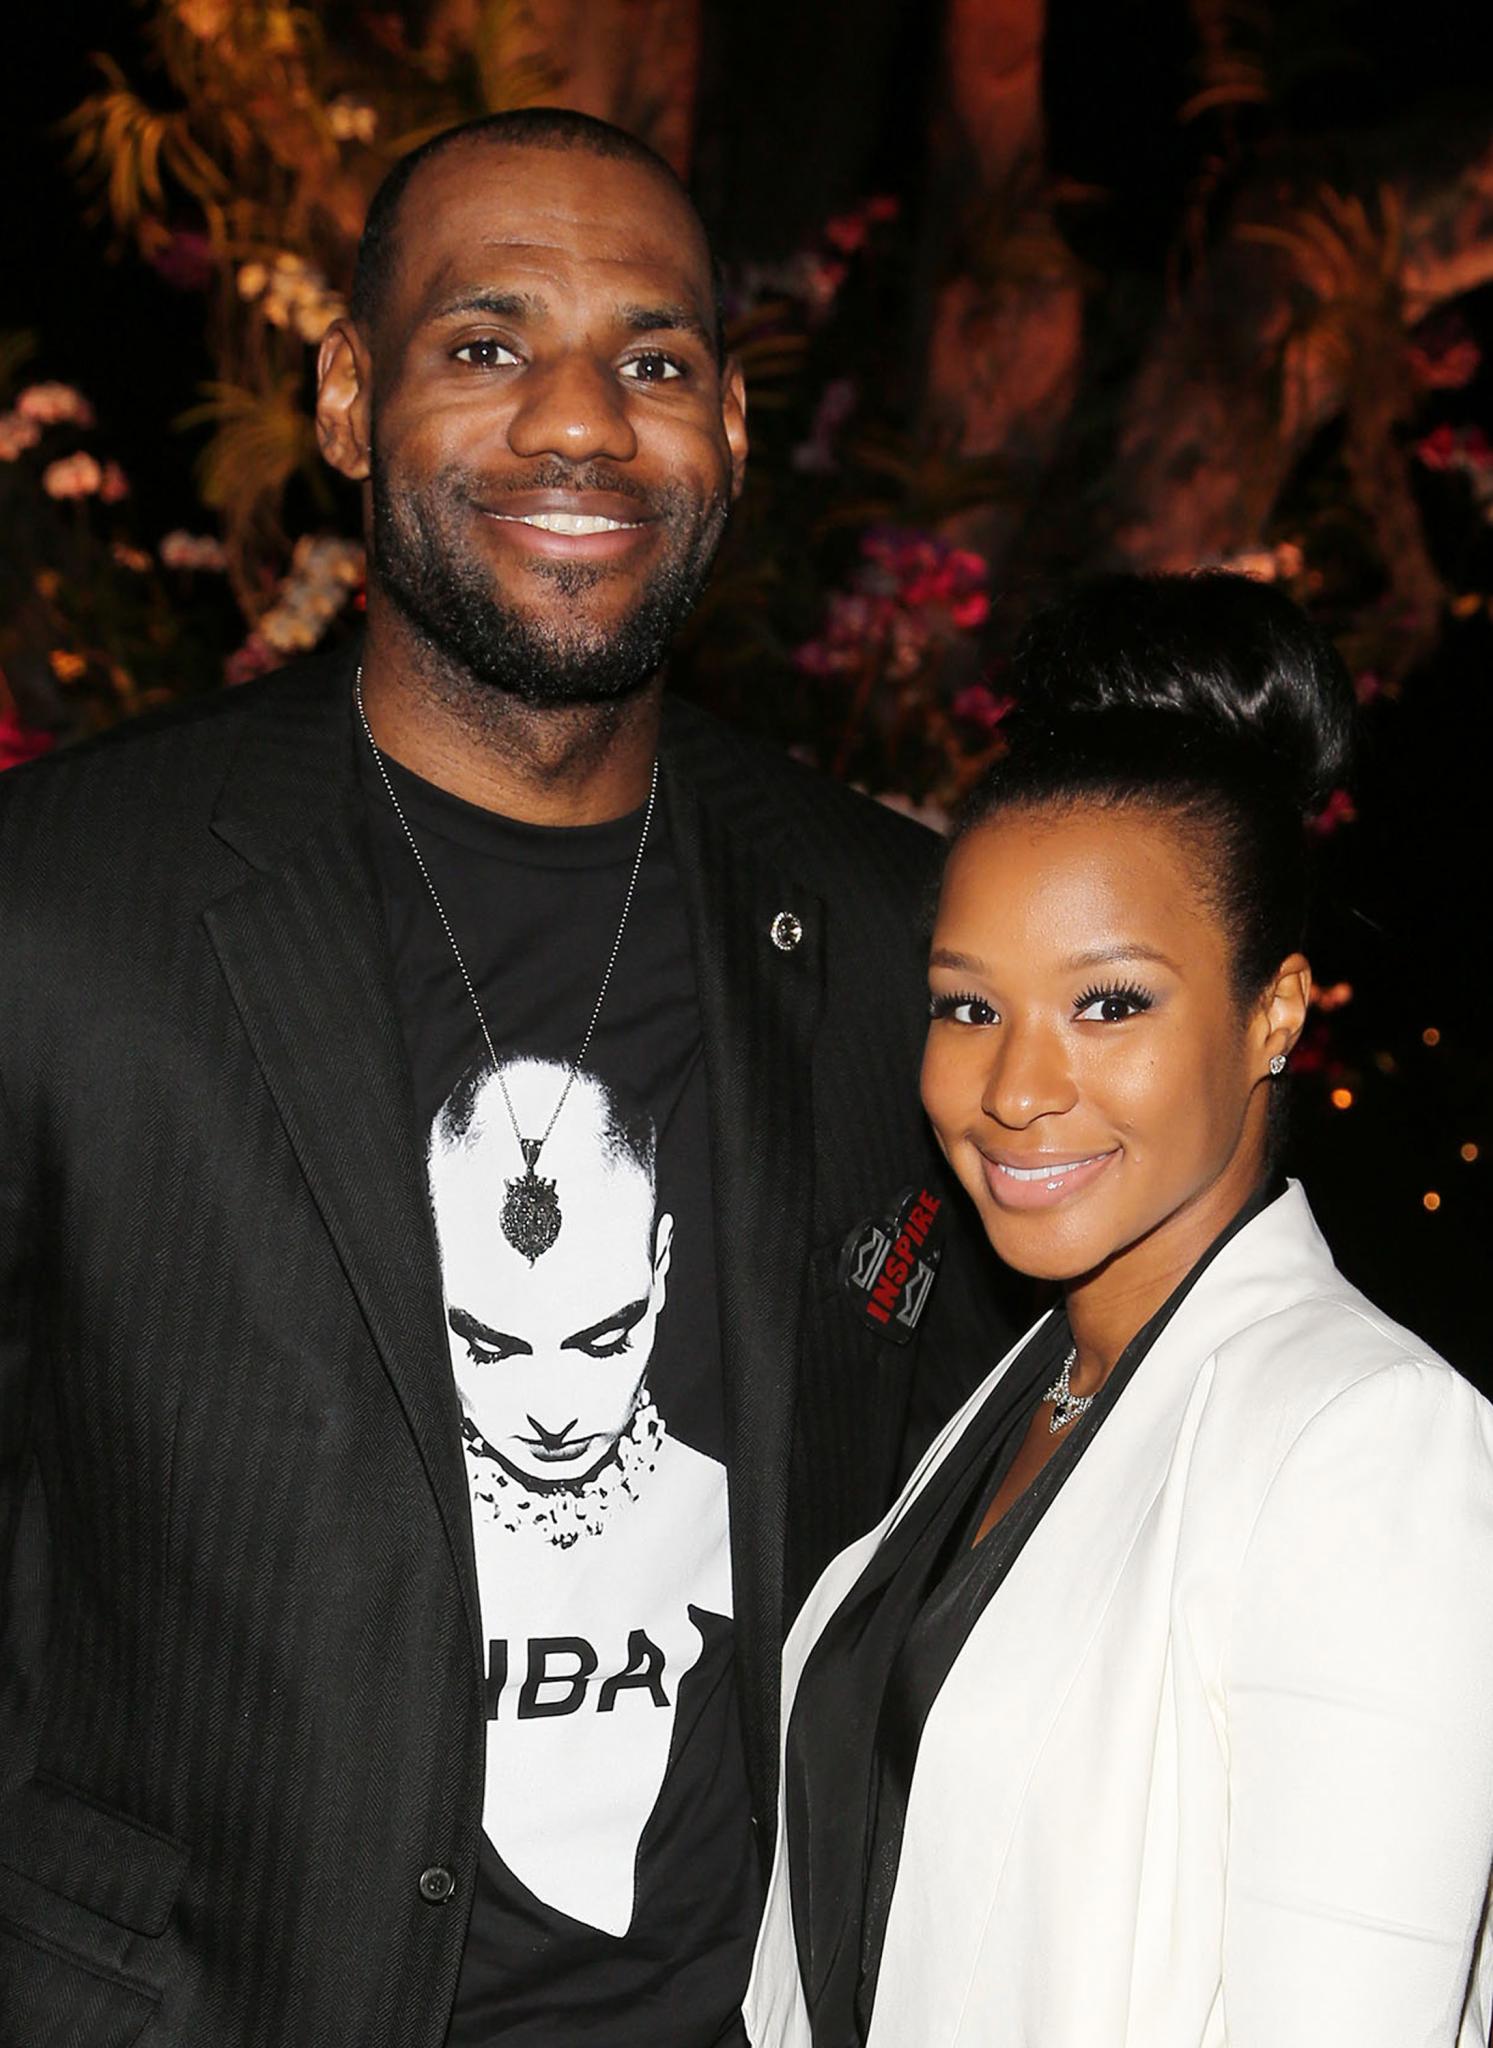 LeBron James & Fiancé Dance-Off for Charity